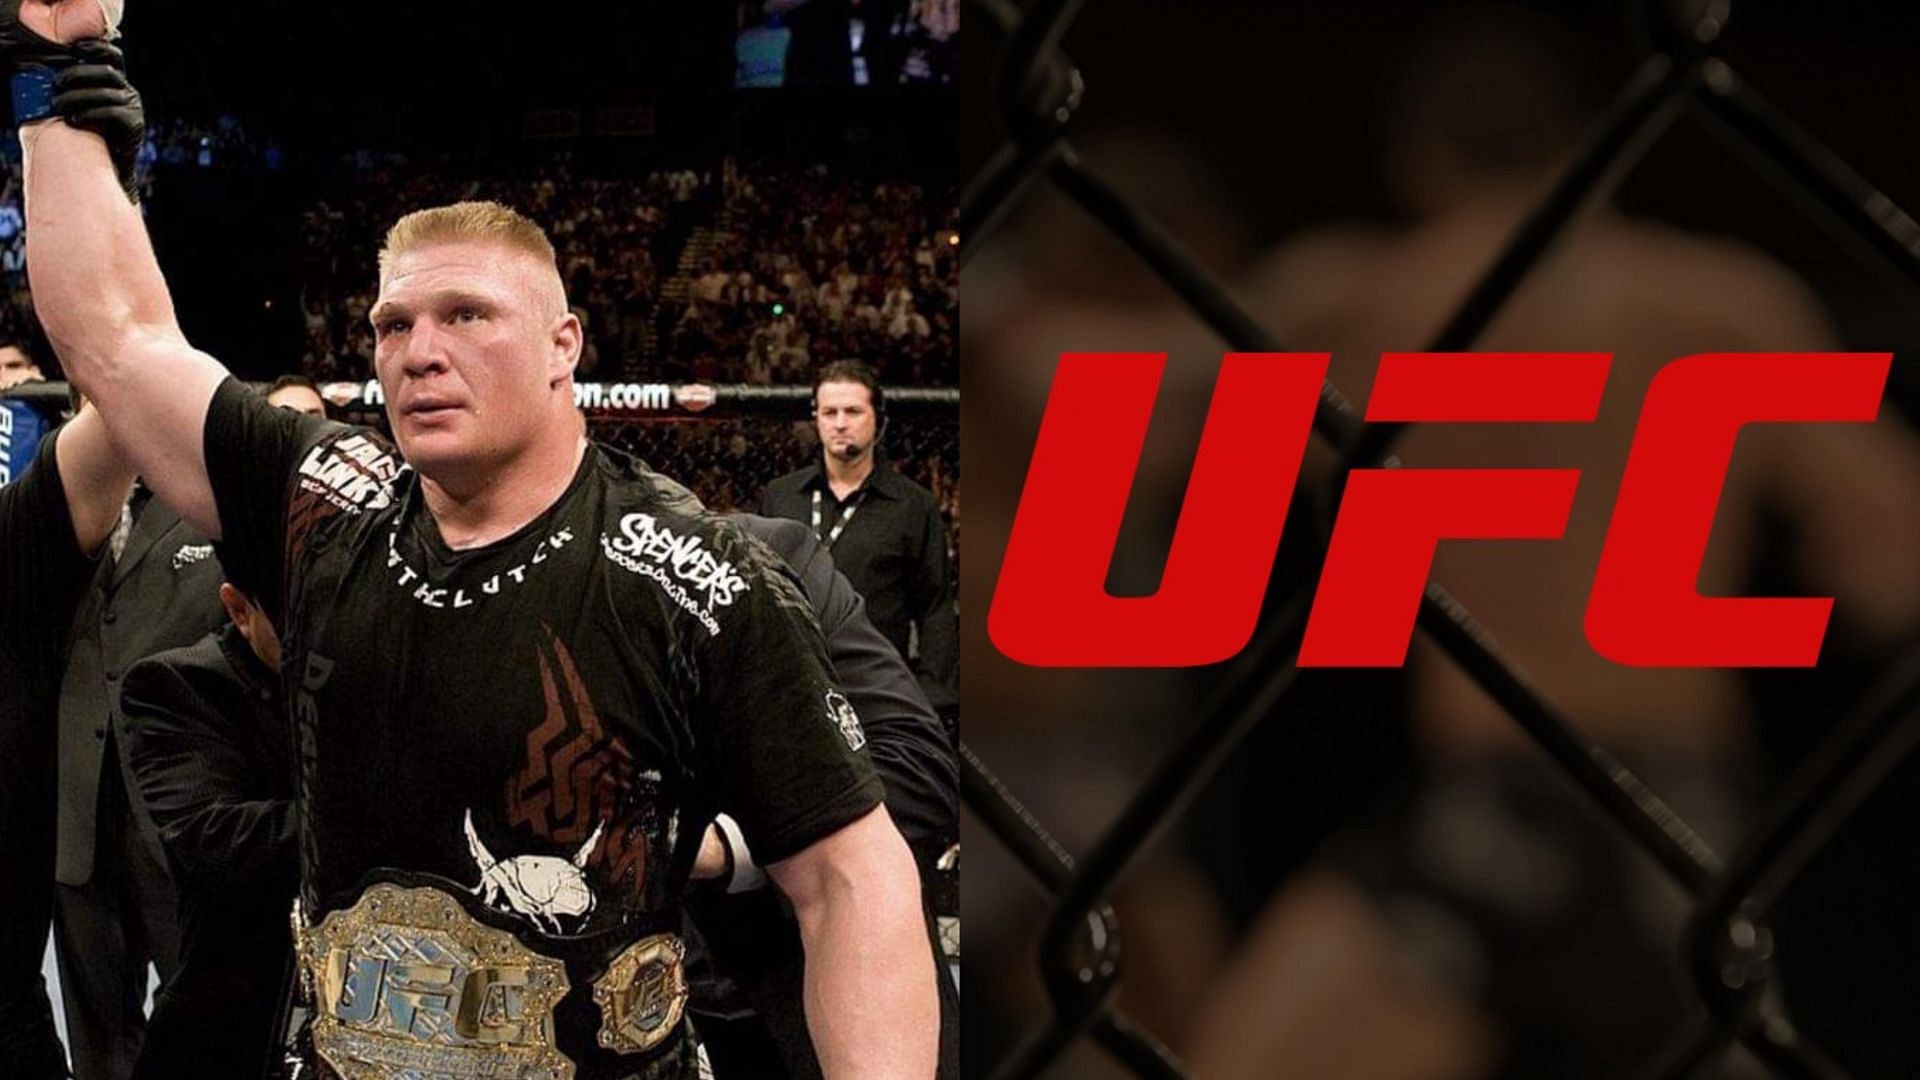 Which current WWE stars would have success in the UFC?